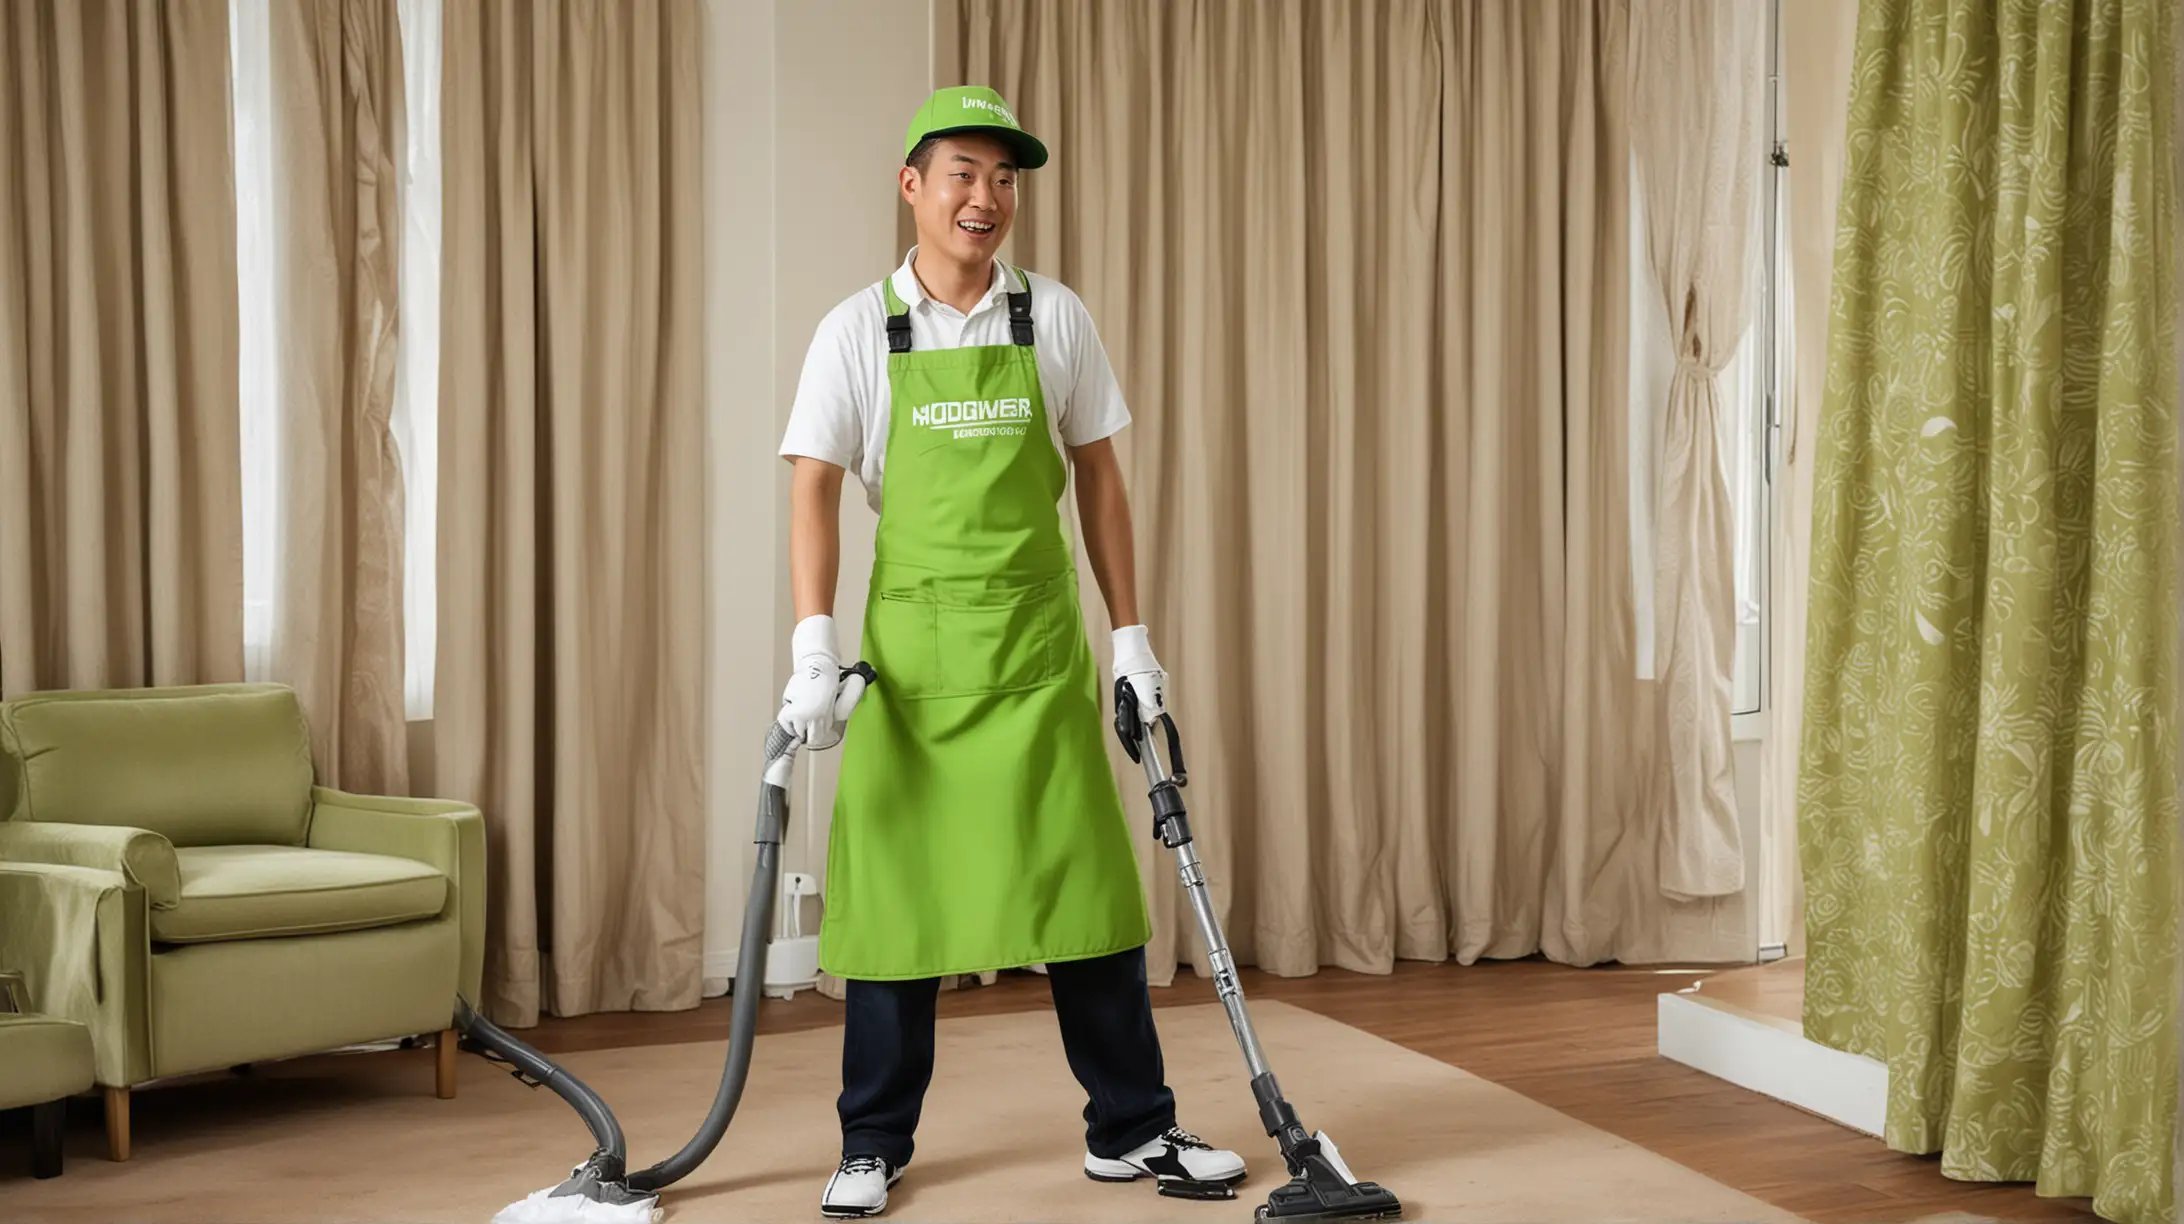 Smiling Chinese Man Vacuuming with Hoover Cleaner in Lime Green Apron